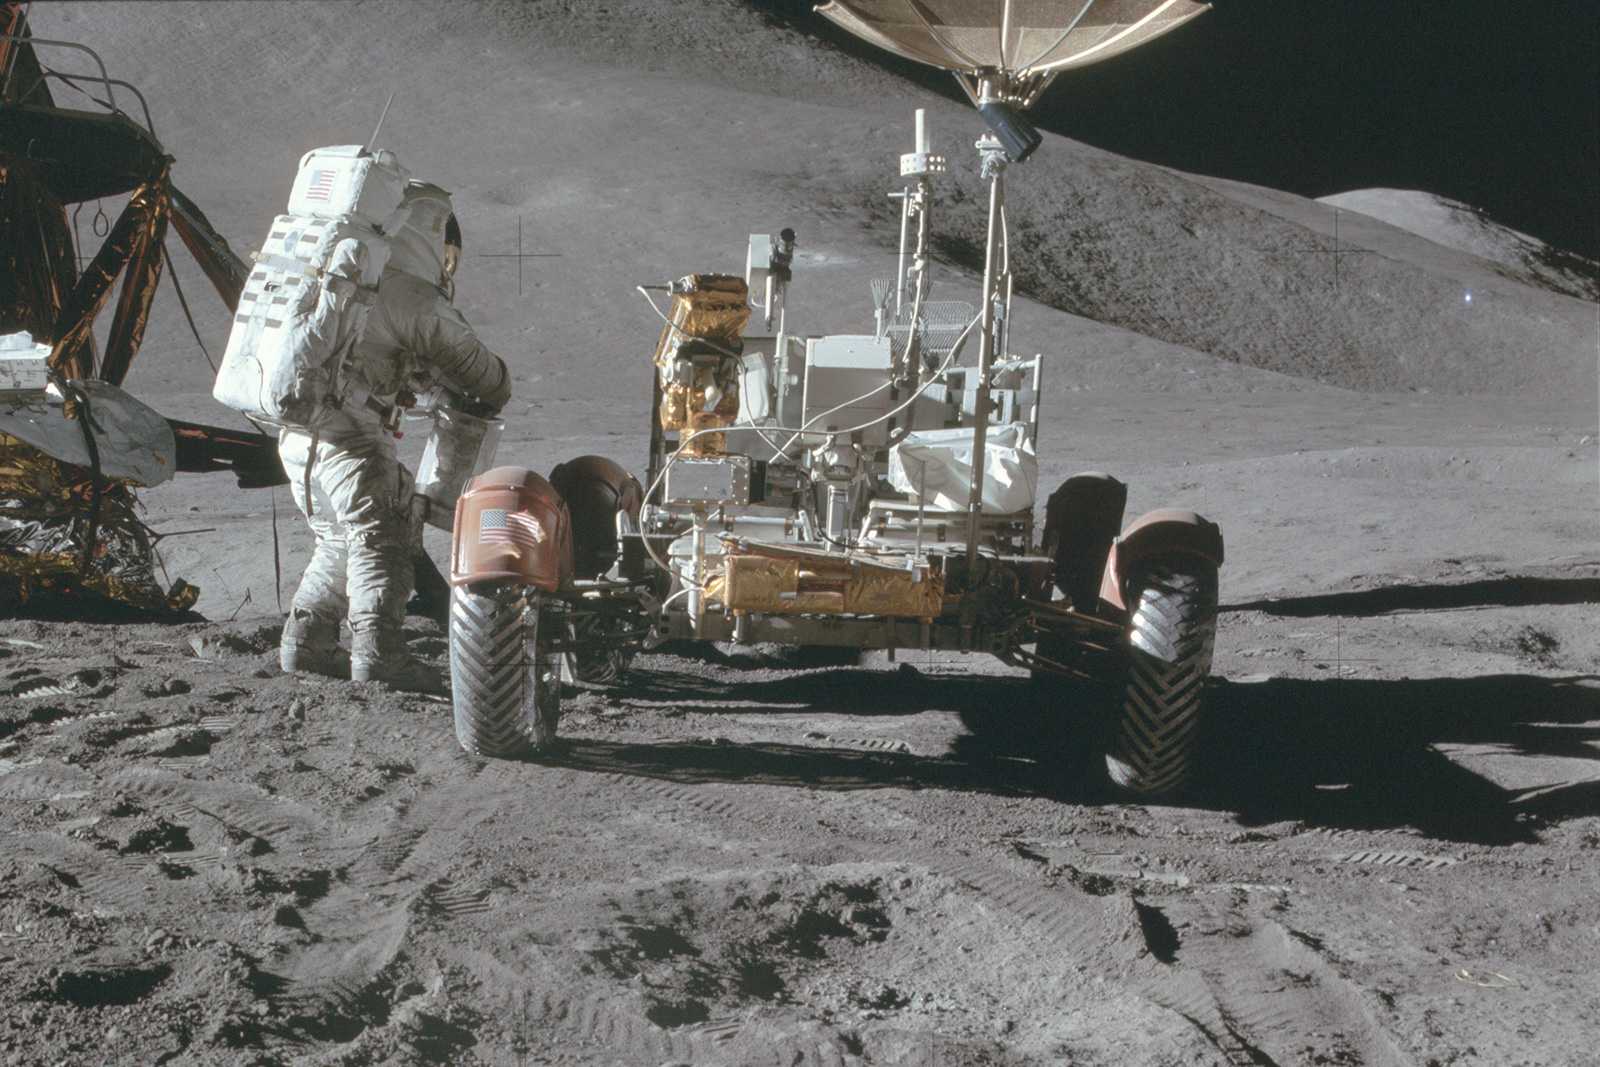 People first drove on the Moon 50 years ago today